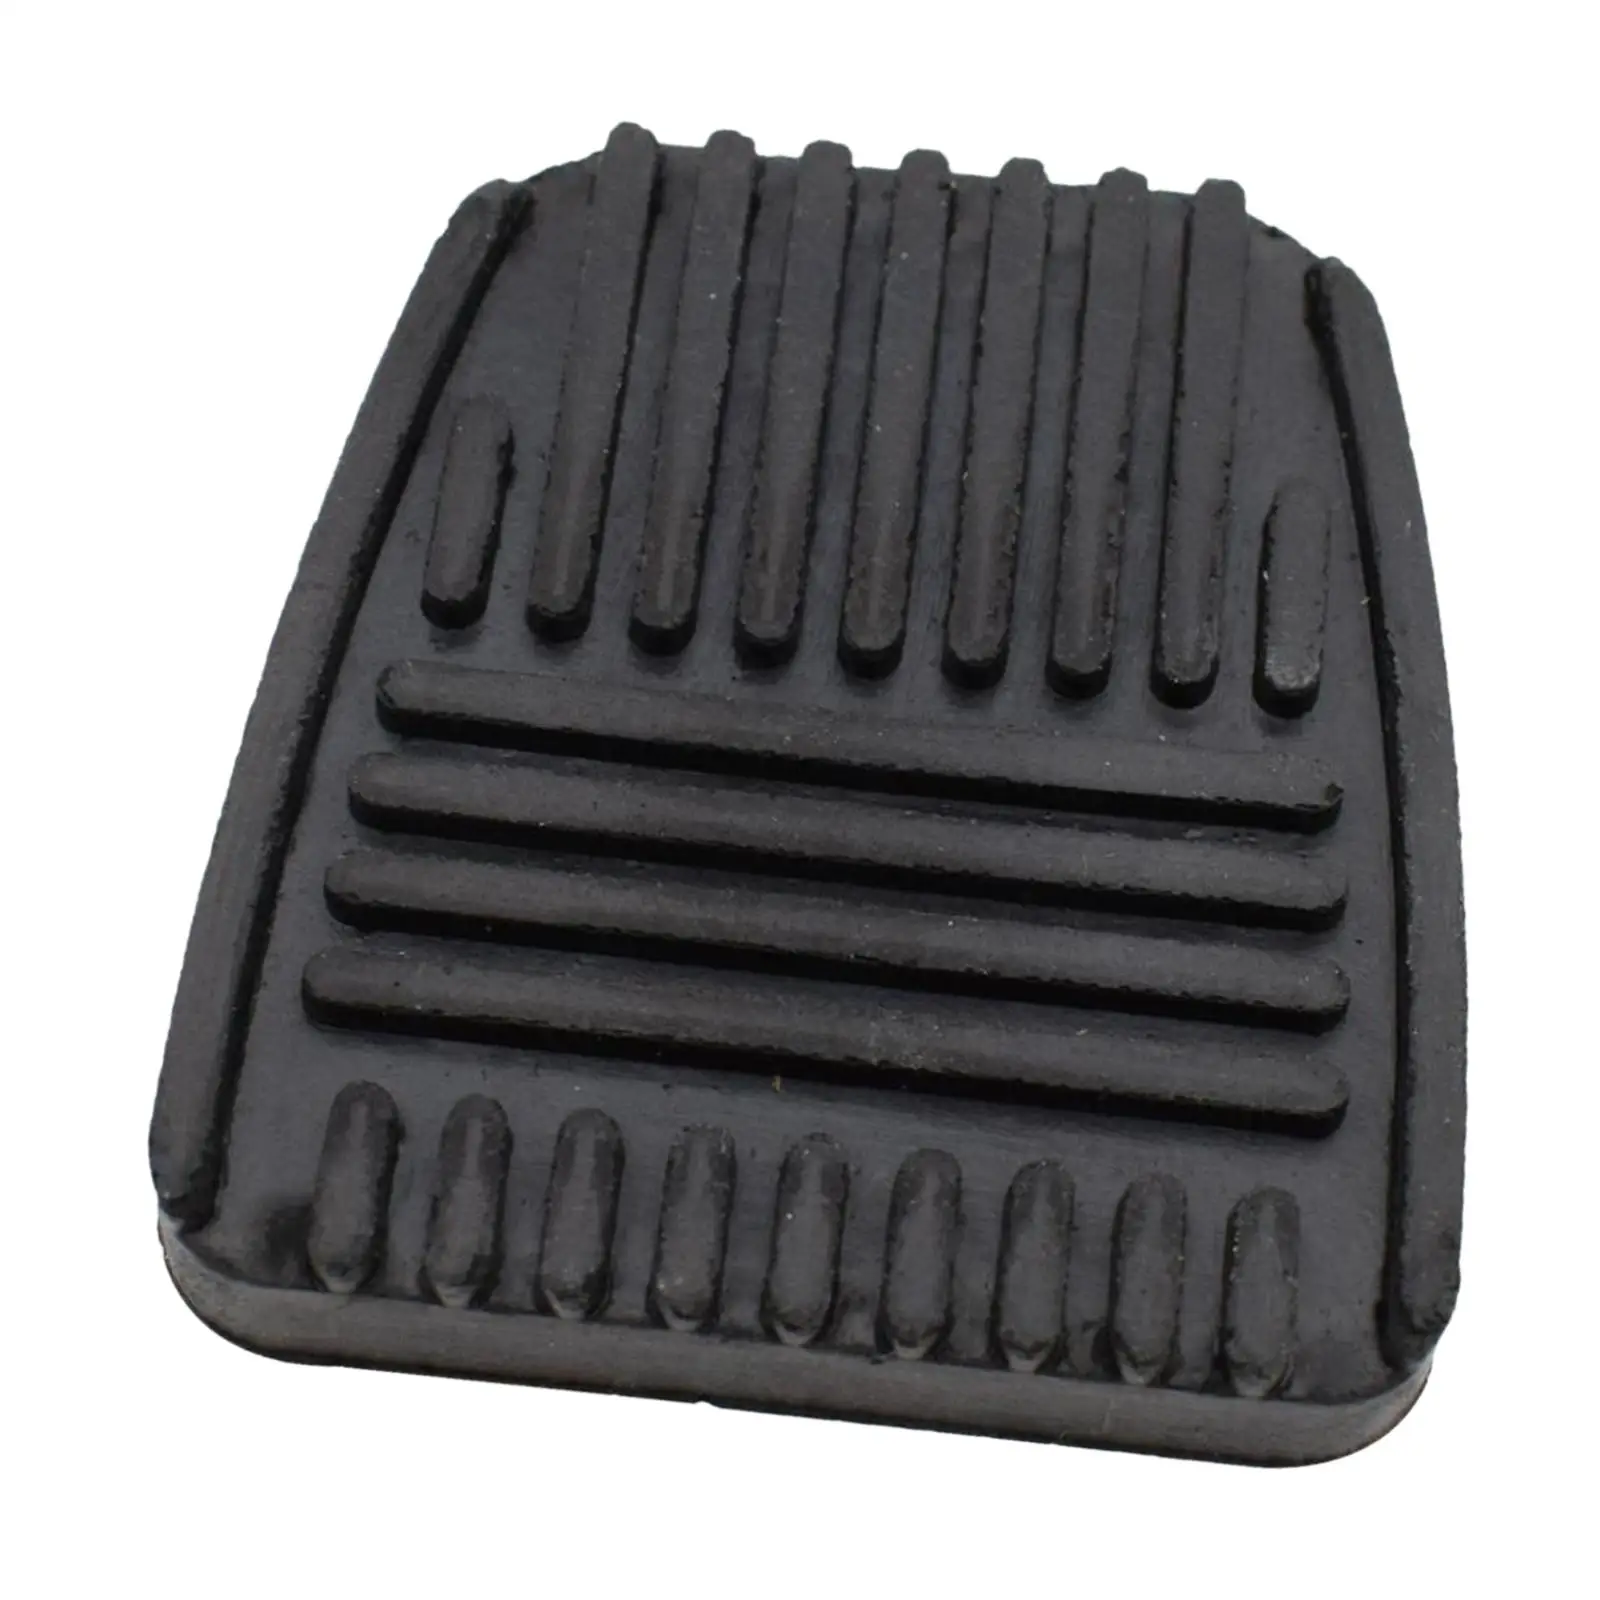 Brake Clutch Pedal Pad Cover 31321-14020 Black for Toyota Celica for tacoma